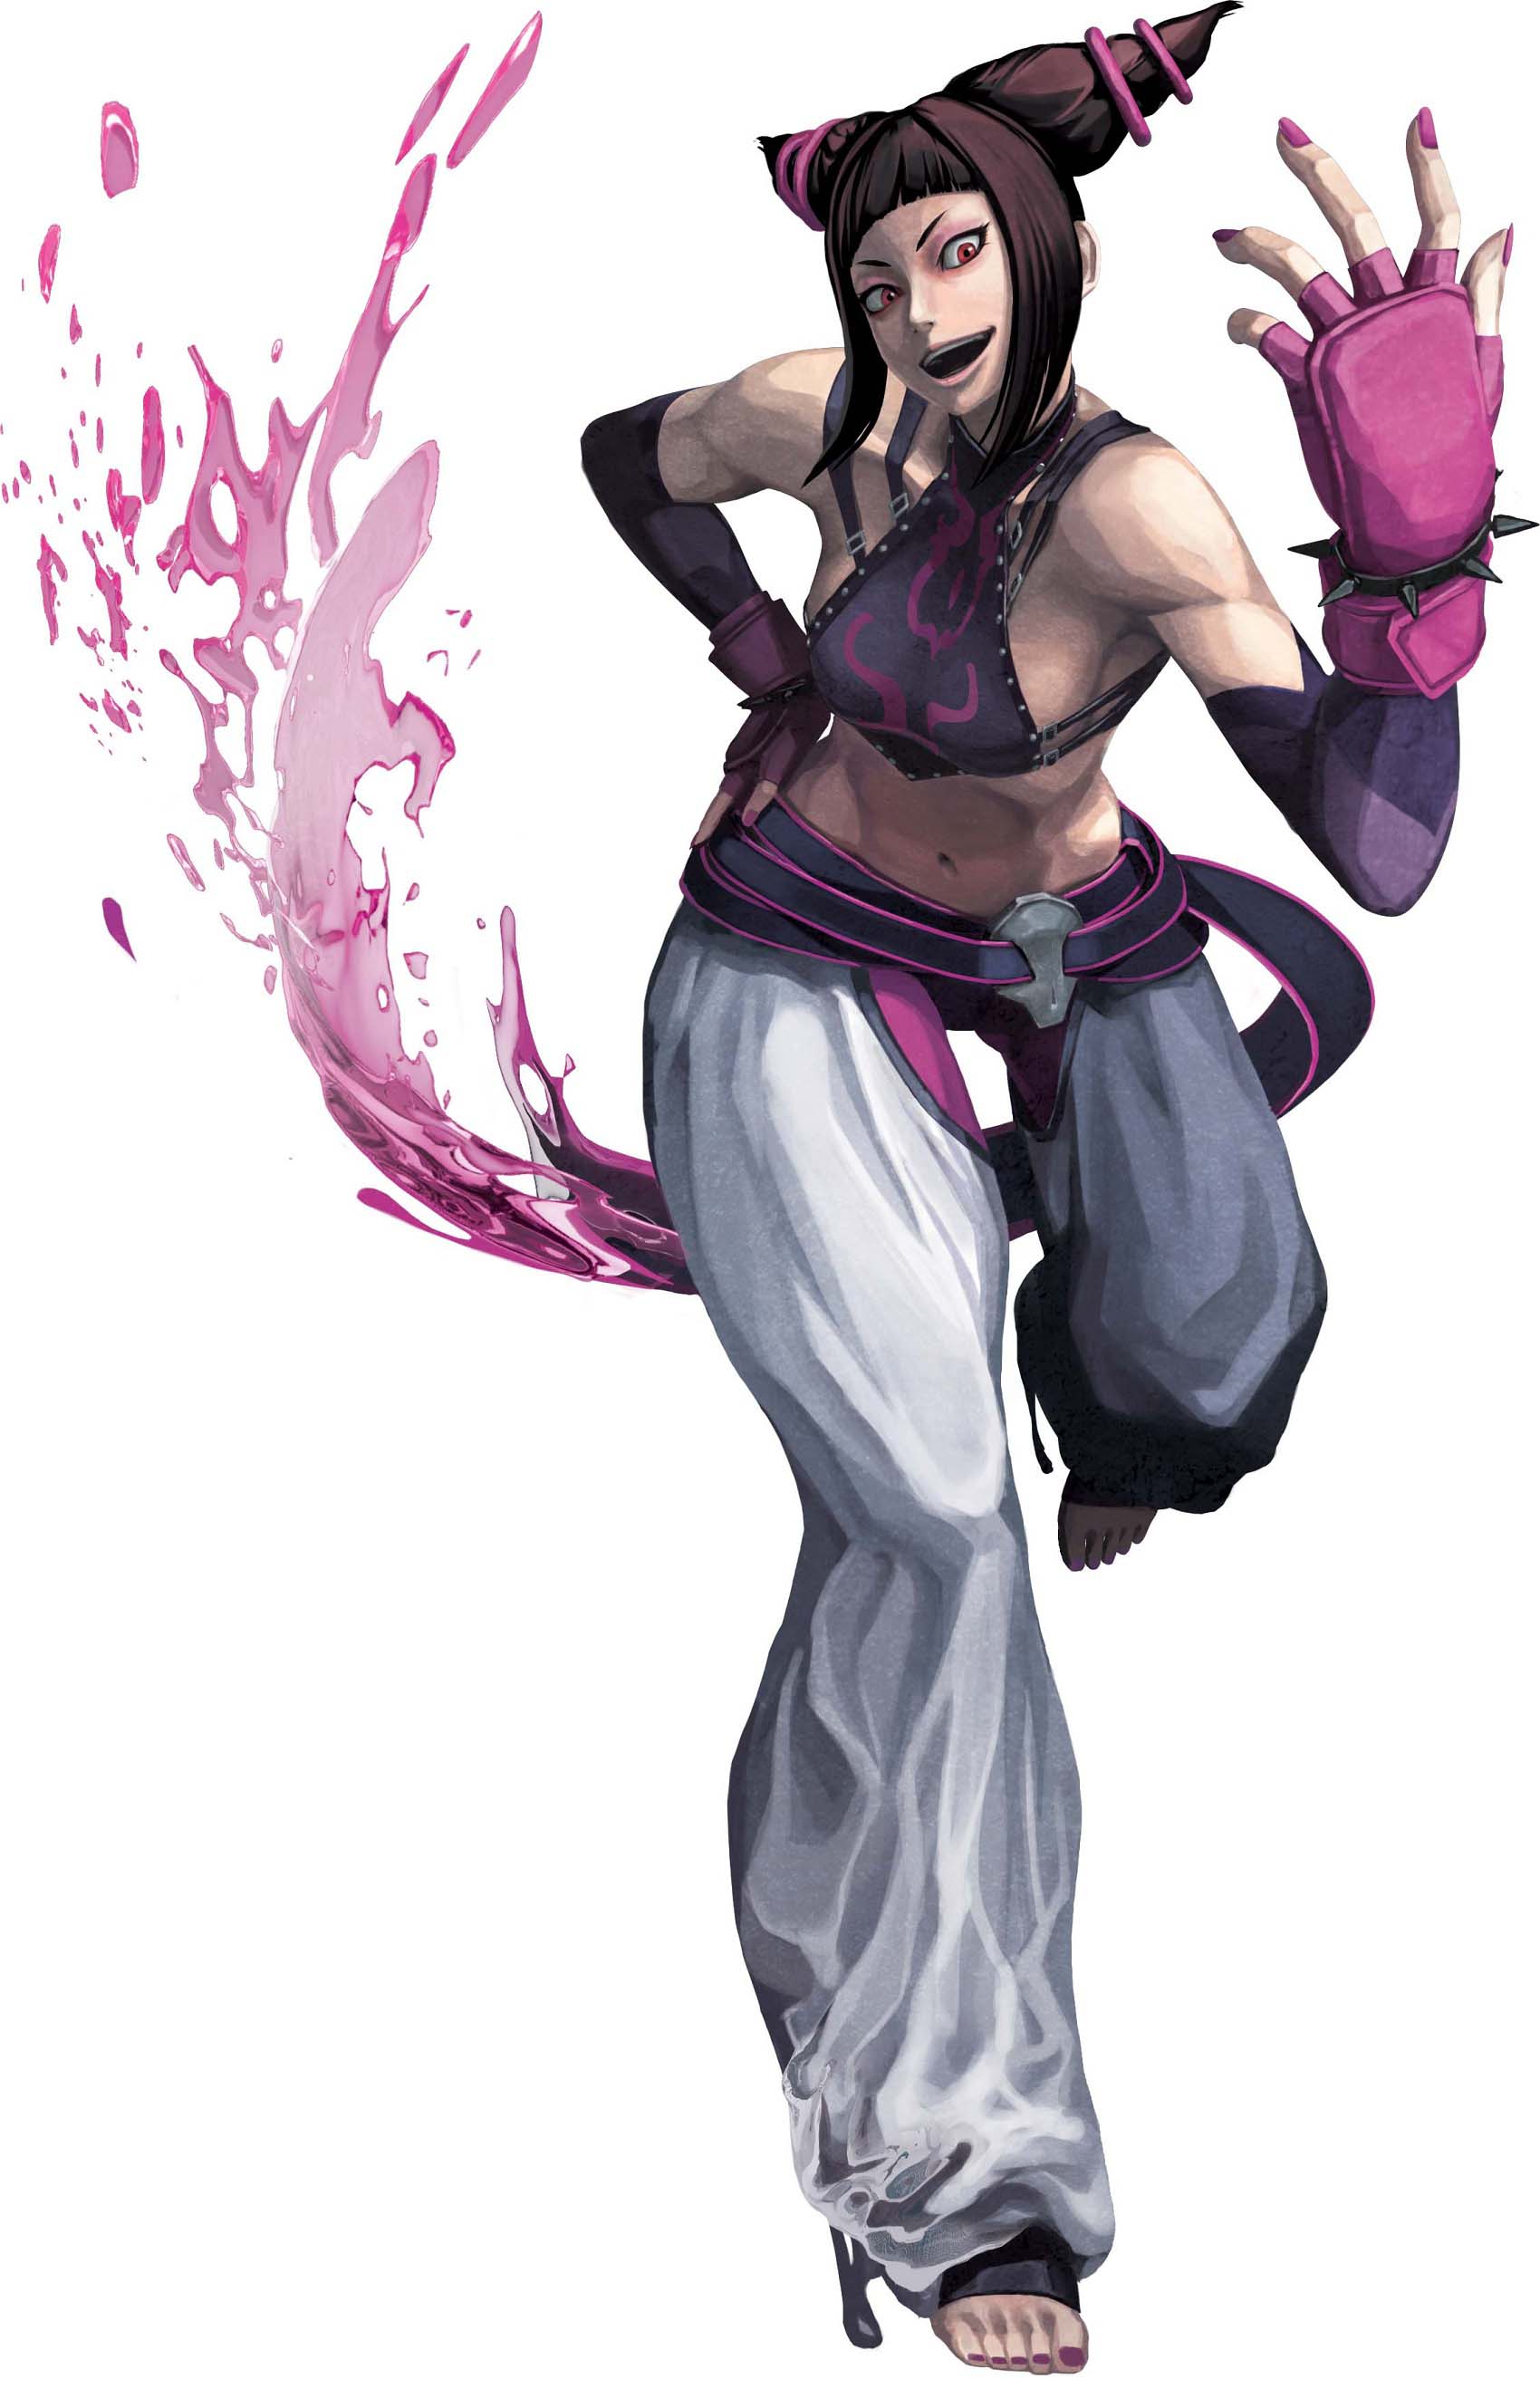 This Site Contains All About Juri Street Fighter Wiki - This Site